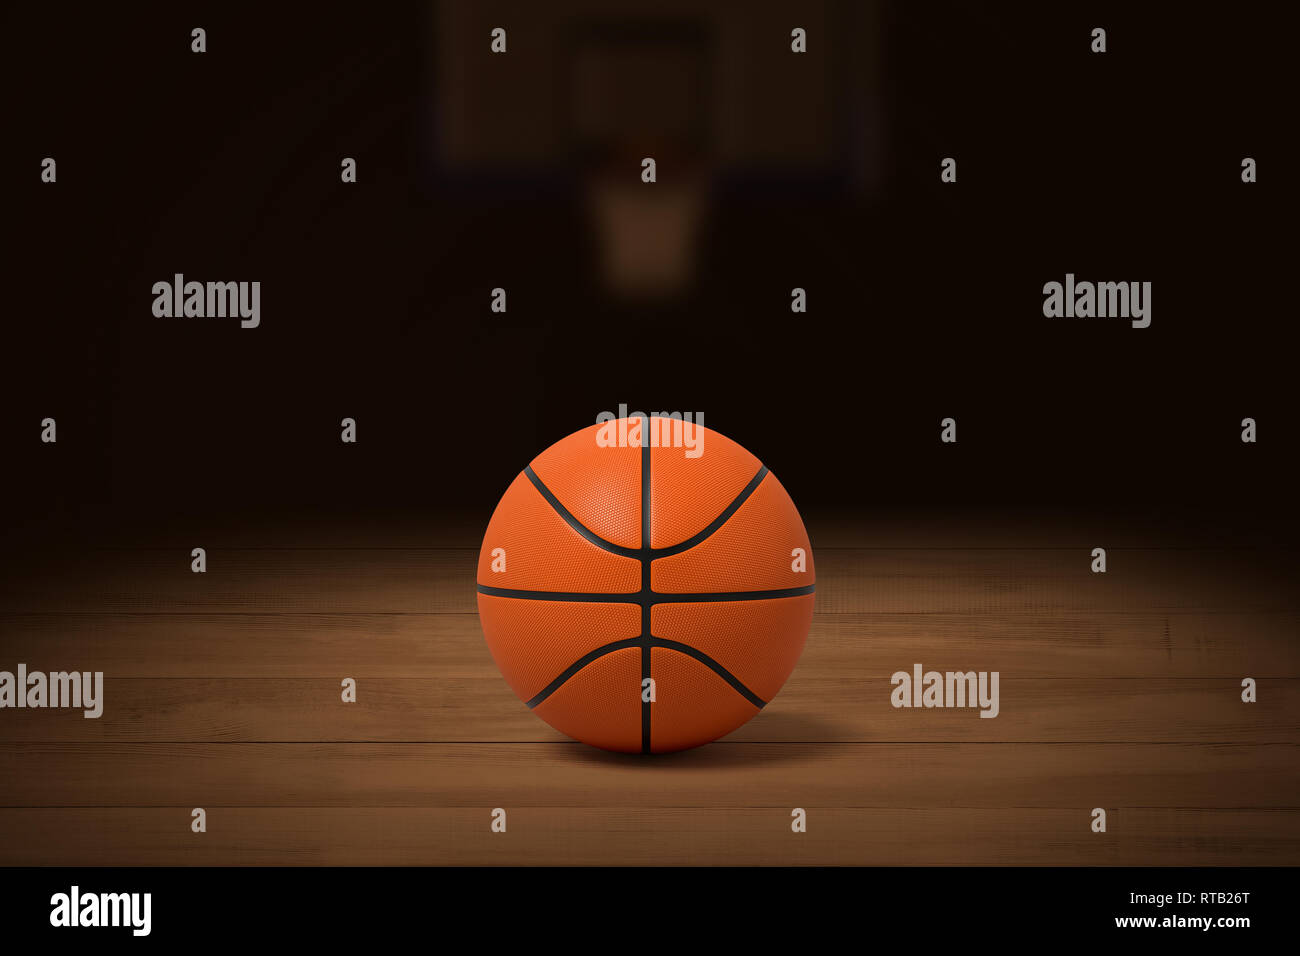 3d rendering of a basketball on the wooden floor in a dimly lit gym with a blurred image of the basket in the background. Stock Photo